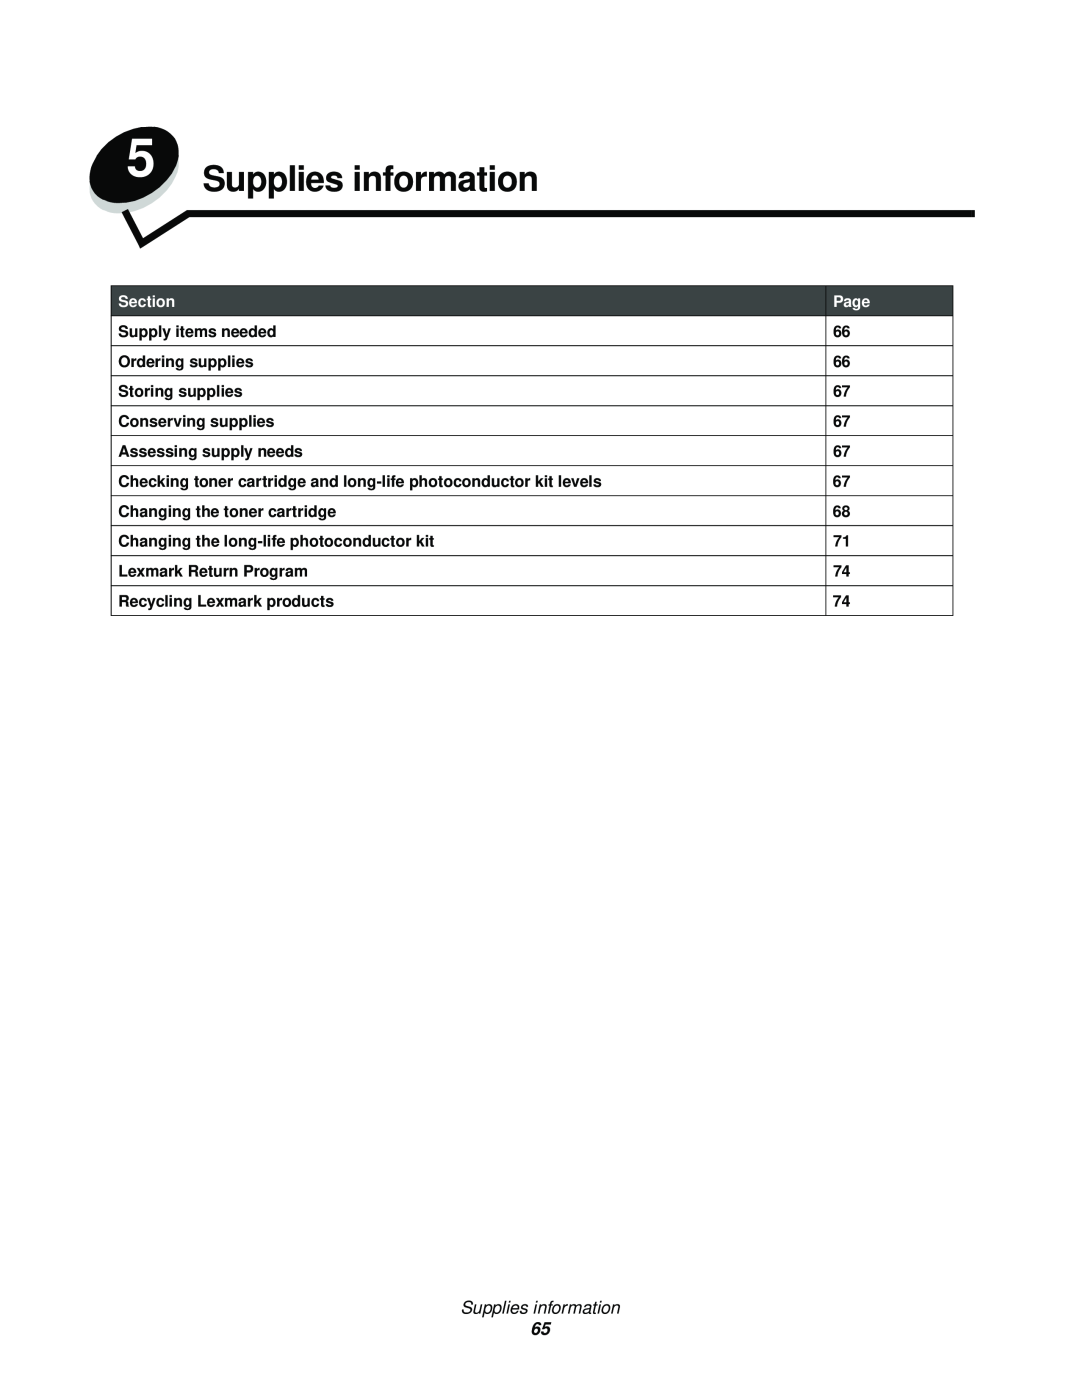 Lexmark 120 Supplies information, Supply items needed, Ordering supplies, Storing supplies, Conserving supplies, Section 